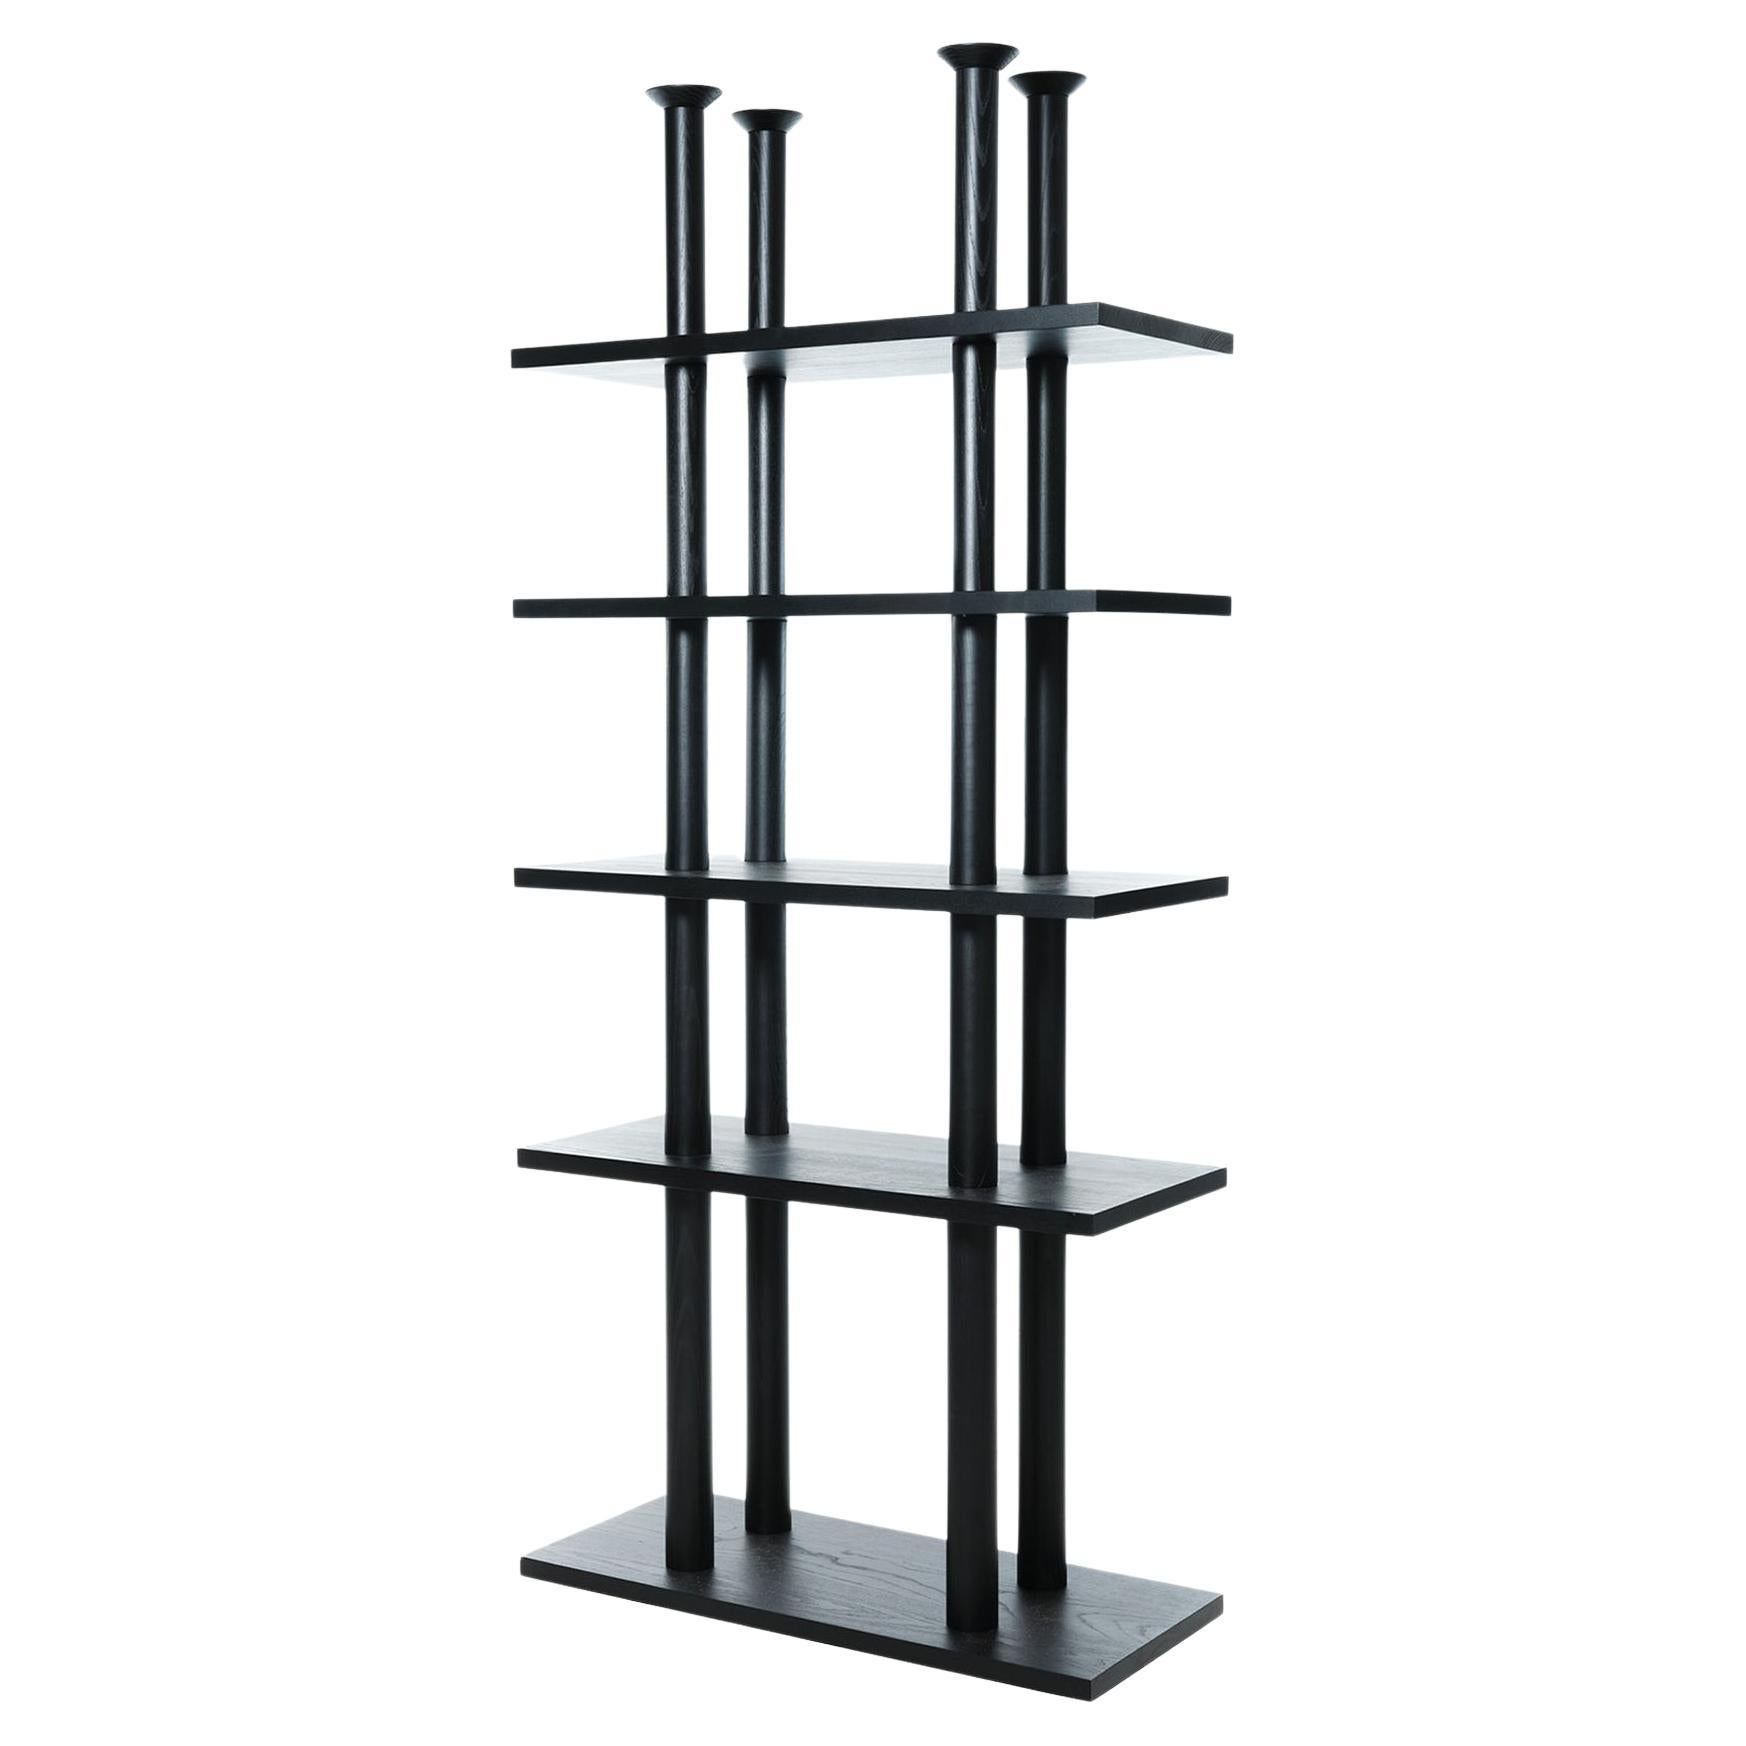 Peristylo 4 Shelves by Oscar Tusquets